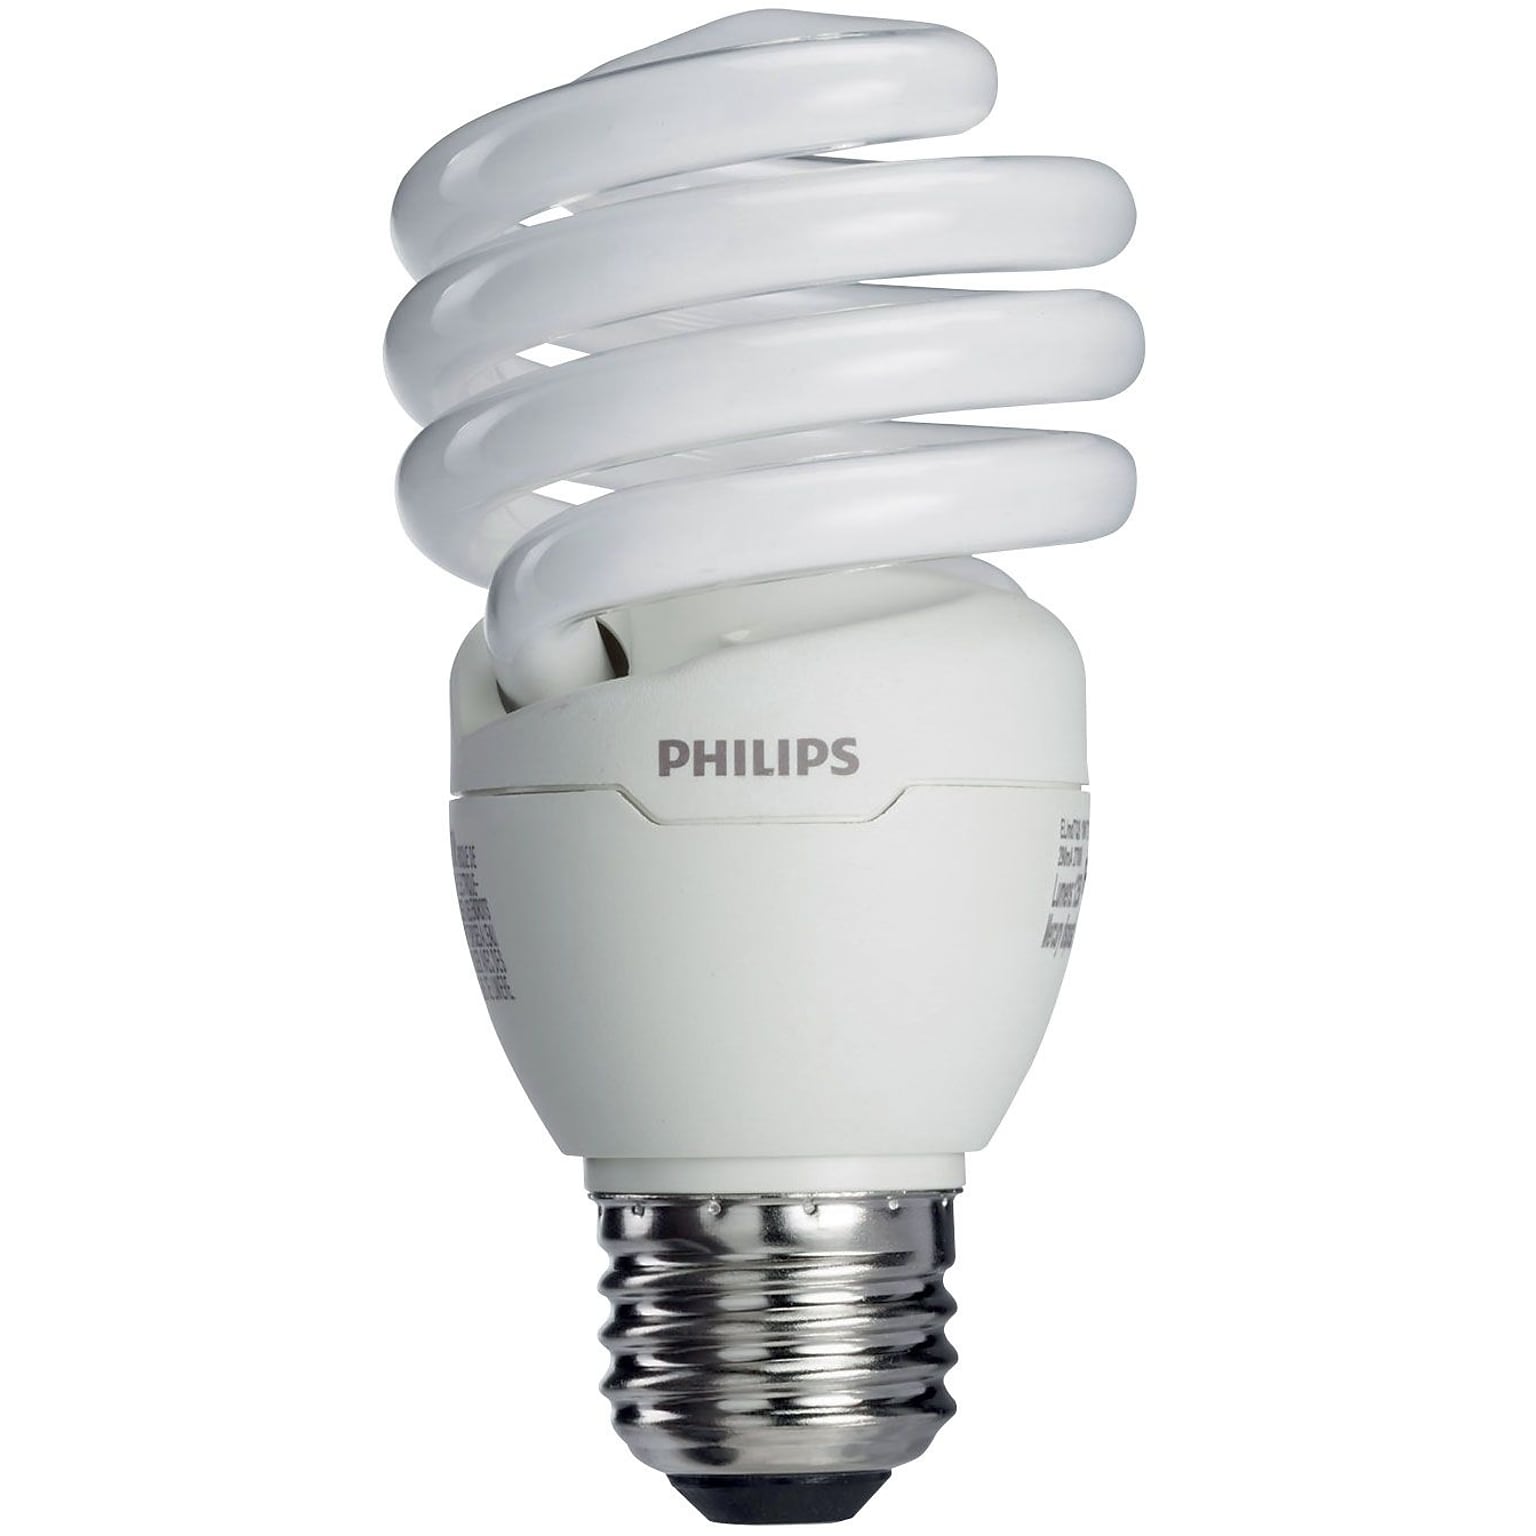 Philips Compact Fluorescent Twister Light Bulb, 23 Watts, Cool White, 6/Pack (414060)